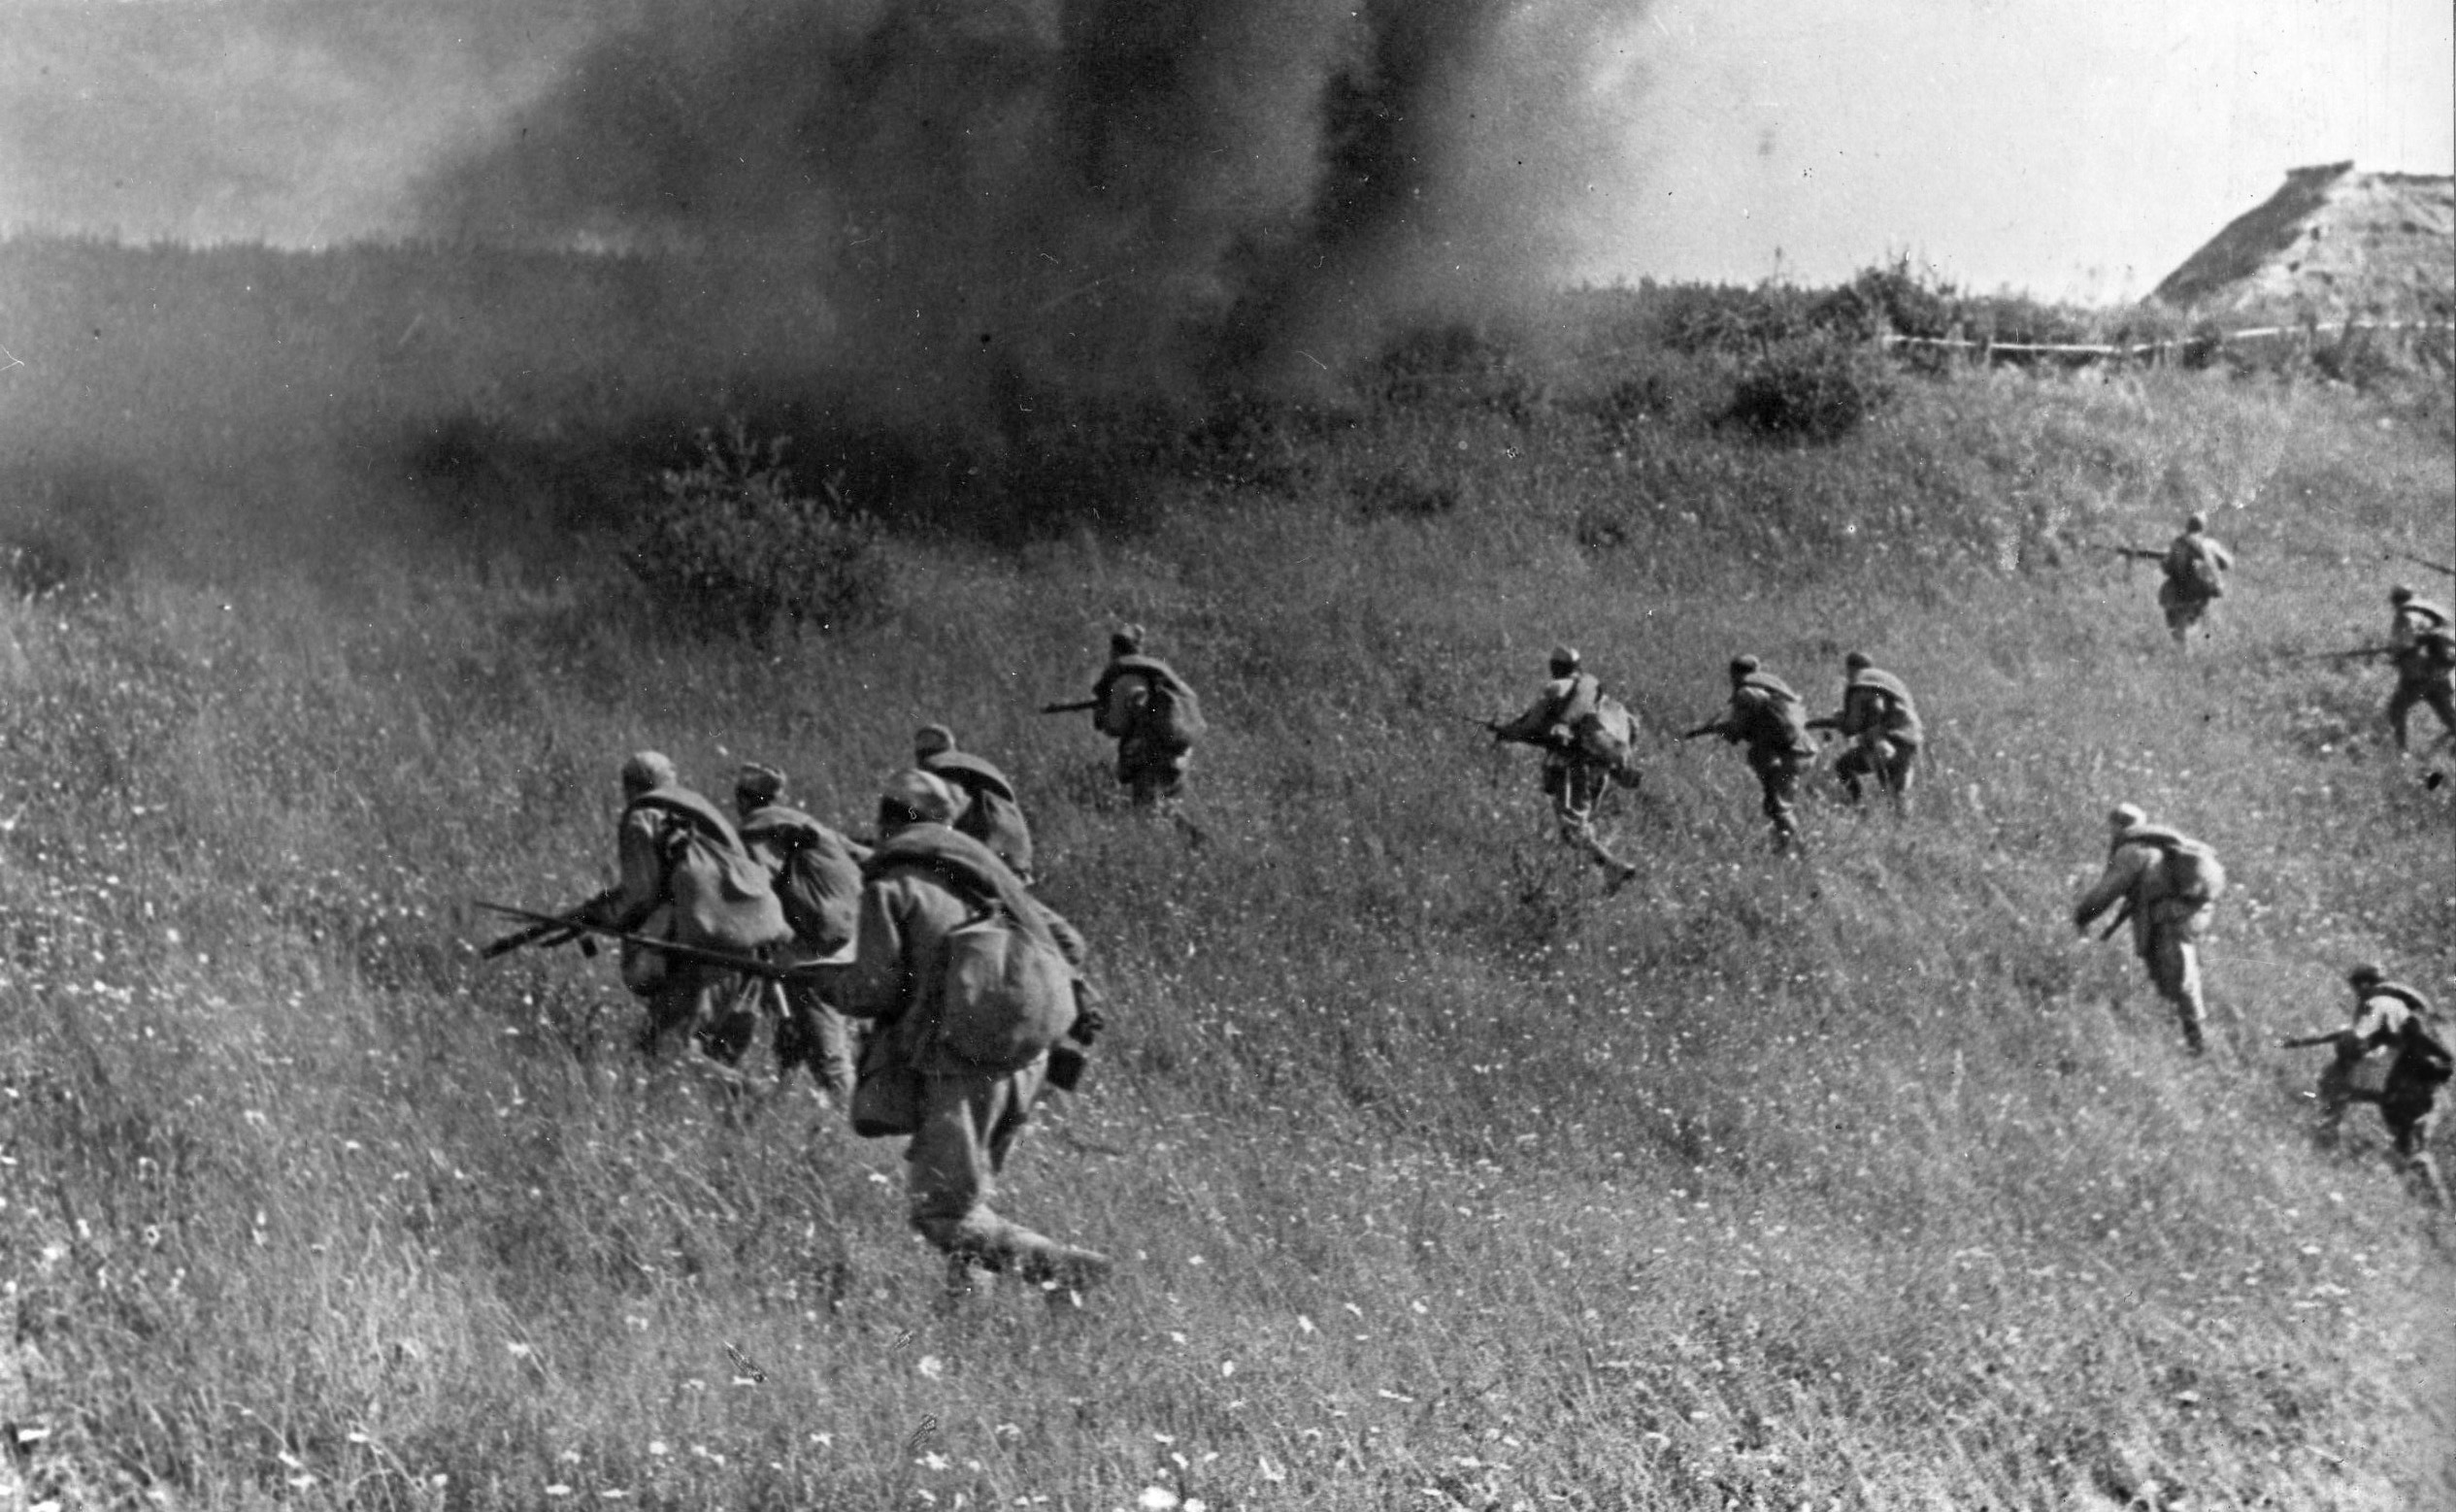 Red Army infantrymen advance as a shell explodes in front of them and throws up a curtain of smoke and debris. Out of the frame, Soviet tanks have taken the lead in this assault somewhere in the Ukraine.